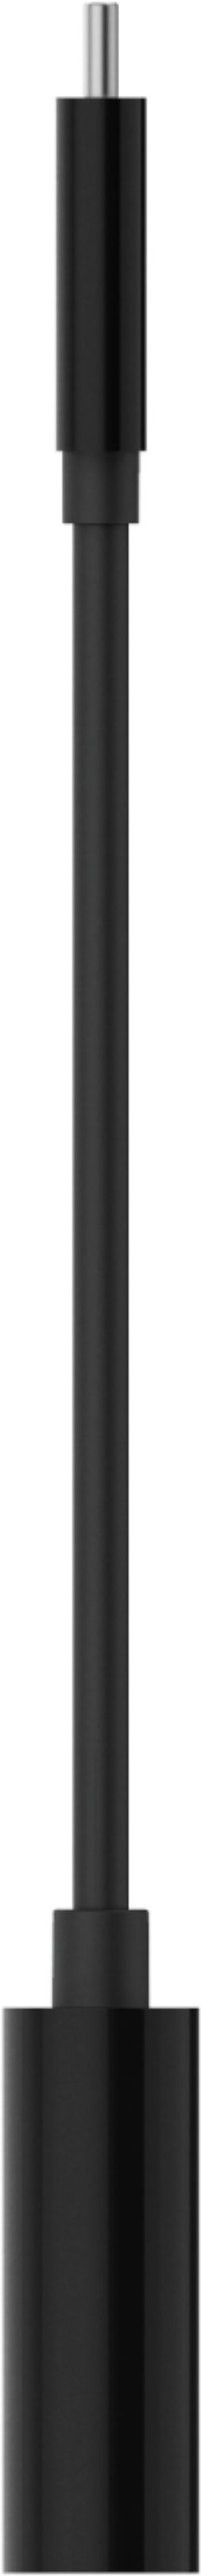 Left View: Belkin - USB Type C-to-HD D-Sub/USB Type C Cable - Black